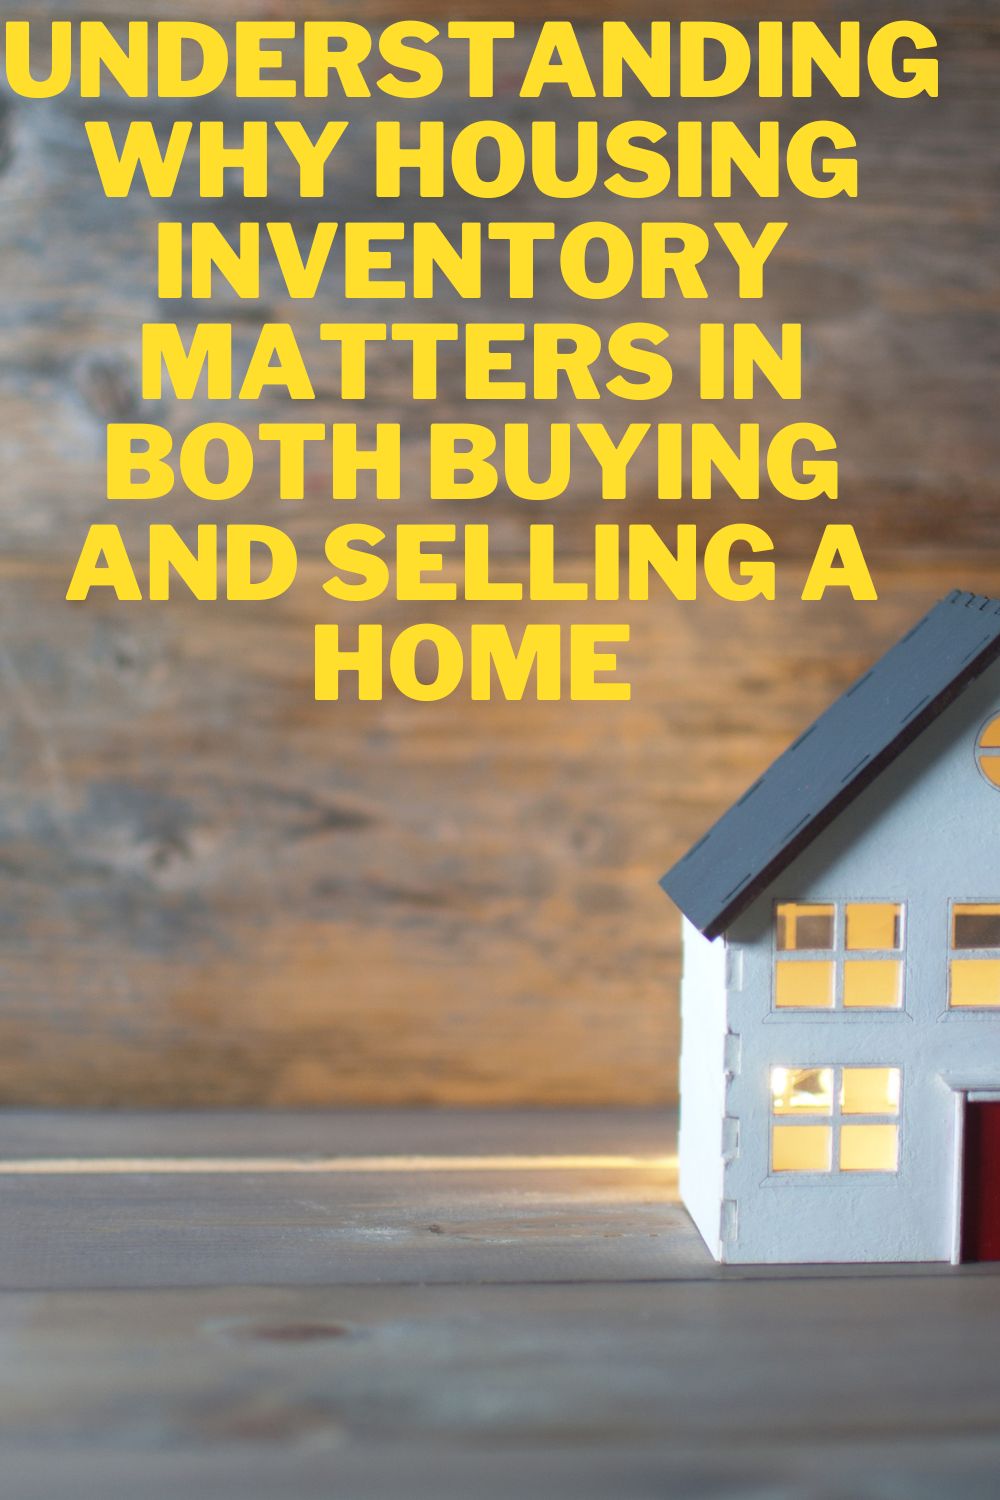 Understanding why Housing inventory Matters in Both Buying and Selling a Home